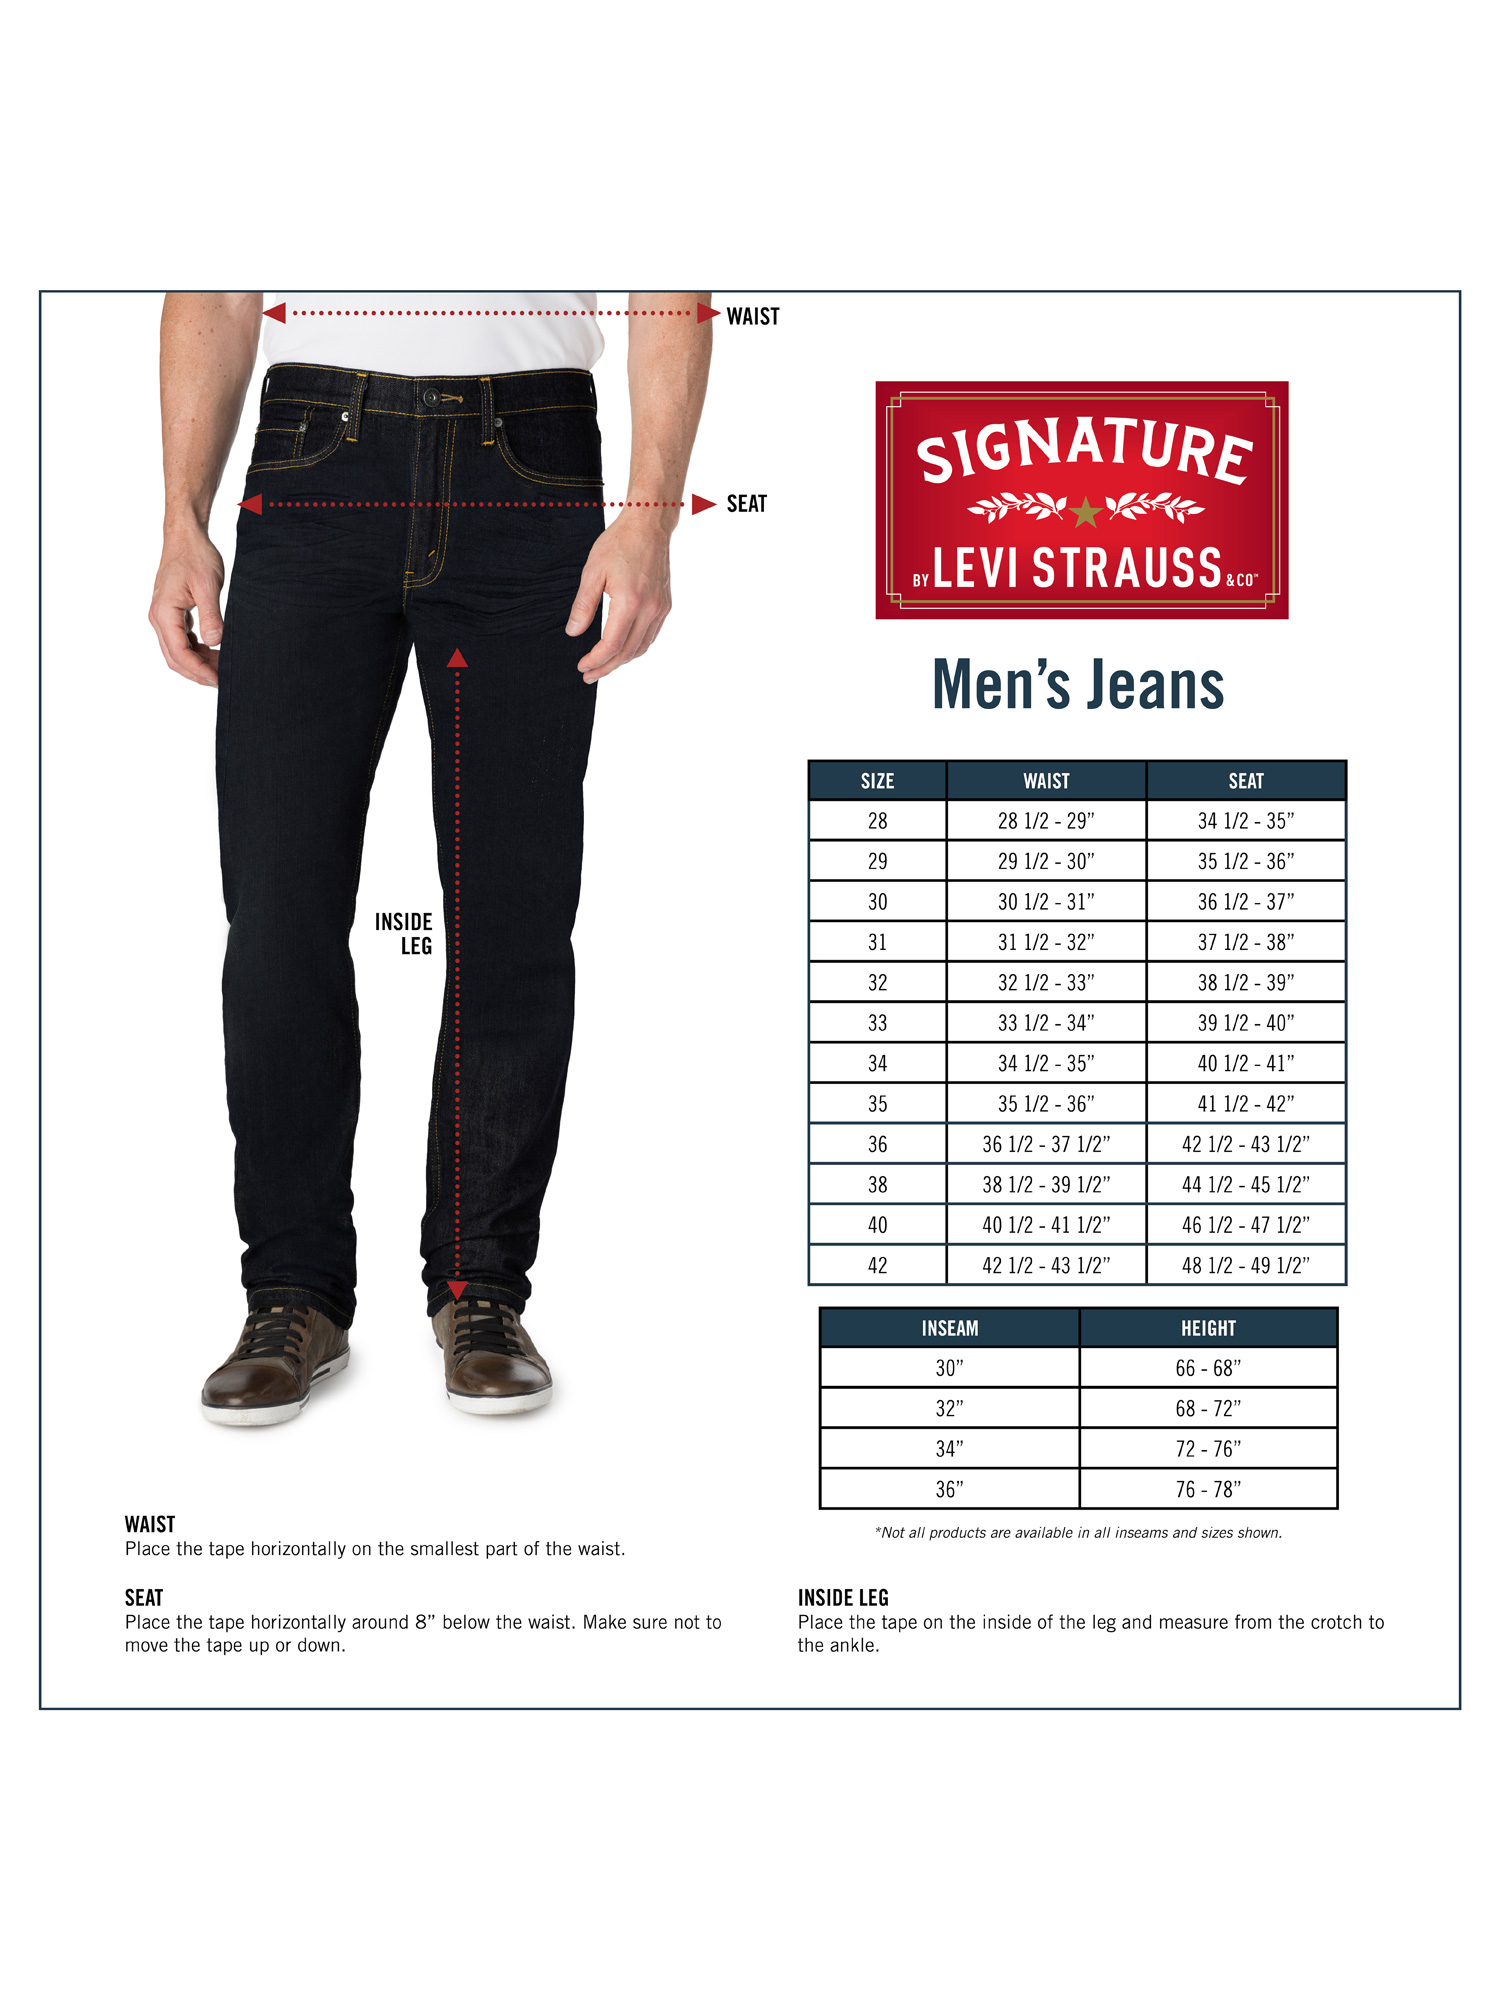 Men's Relaxed Fit Jeans - image 4 of 4